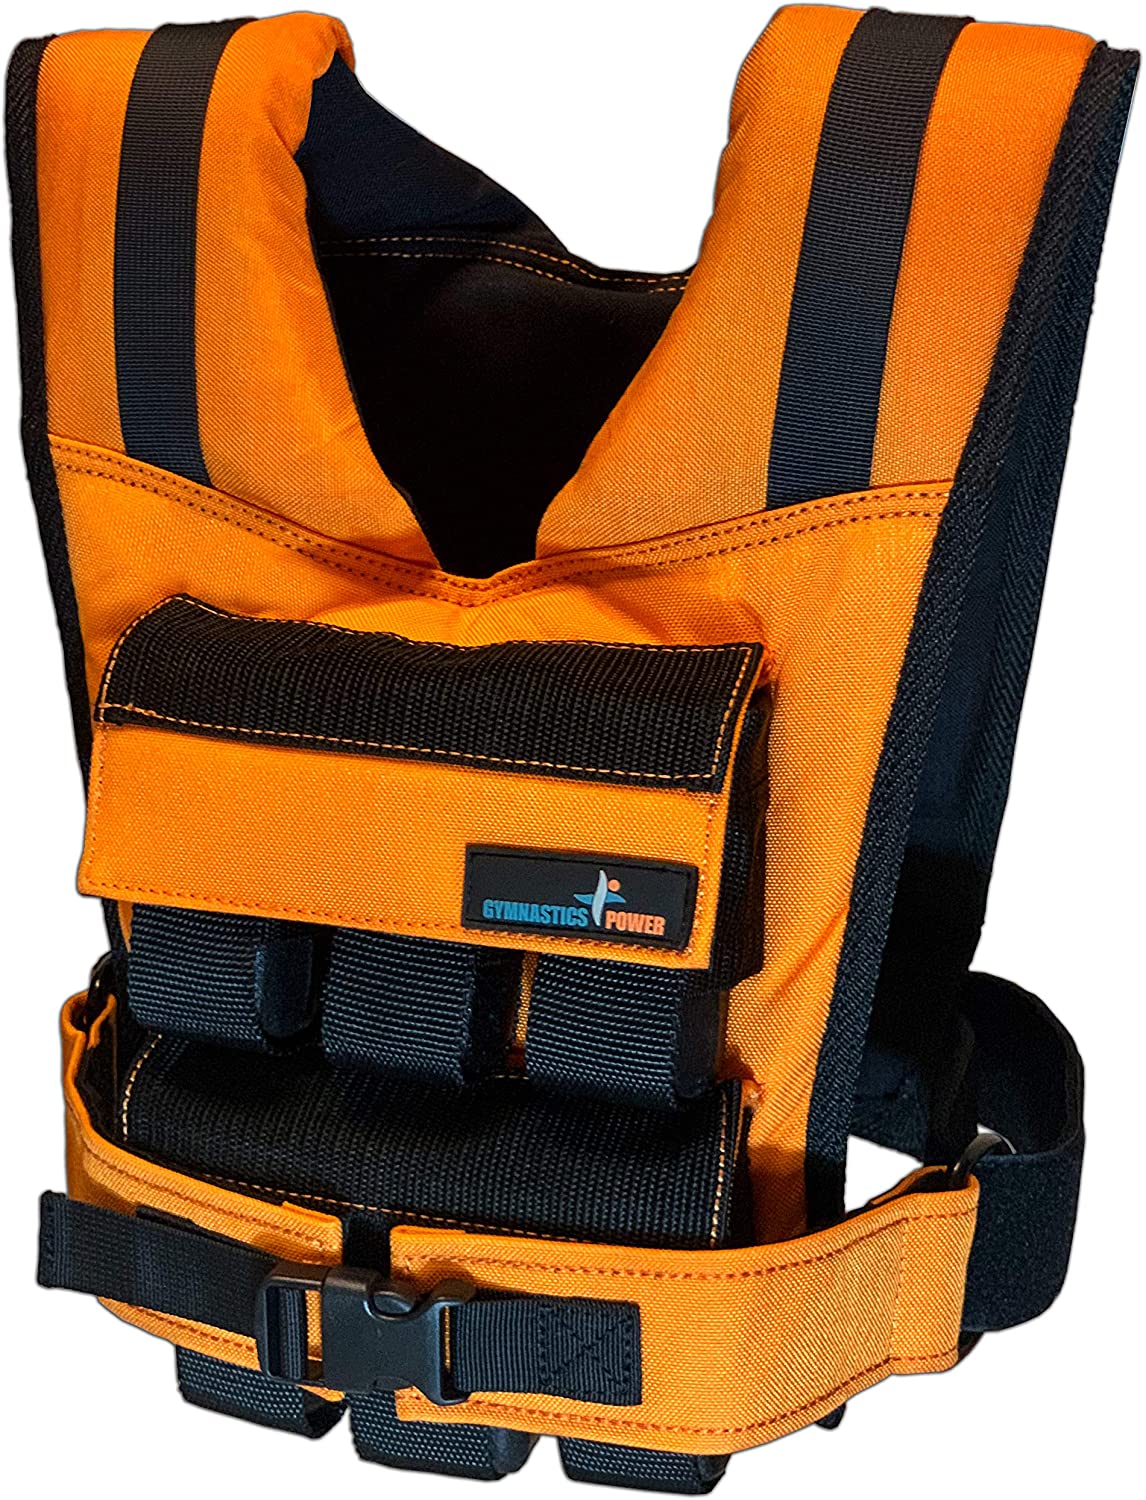 Bionic Body 15lb Weighted Vest - Optimize your Cardio Workout